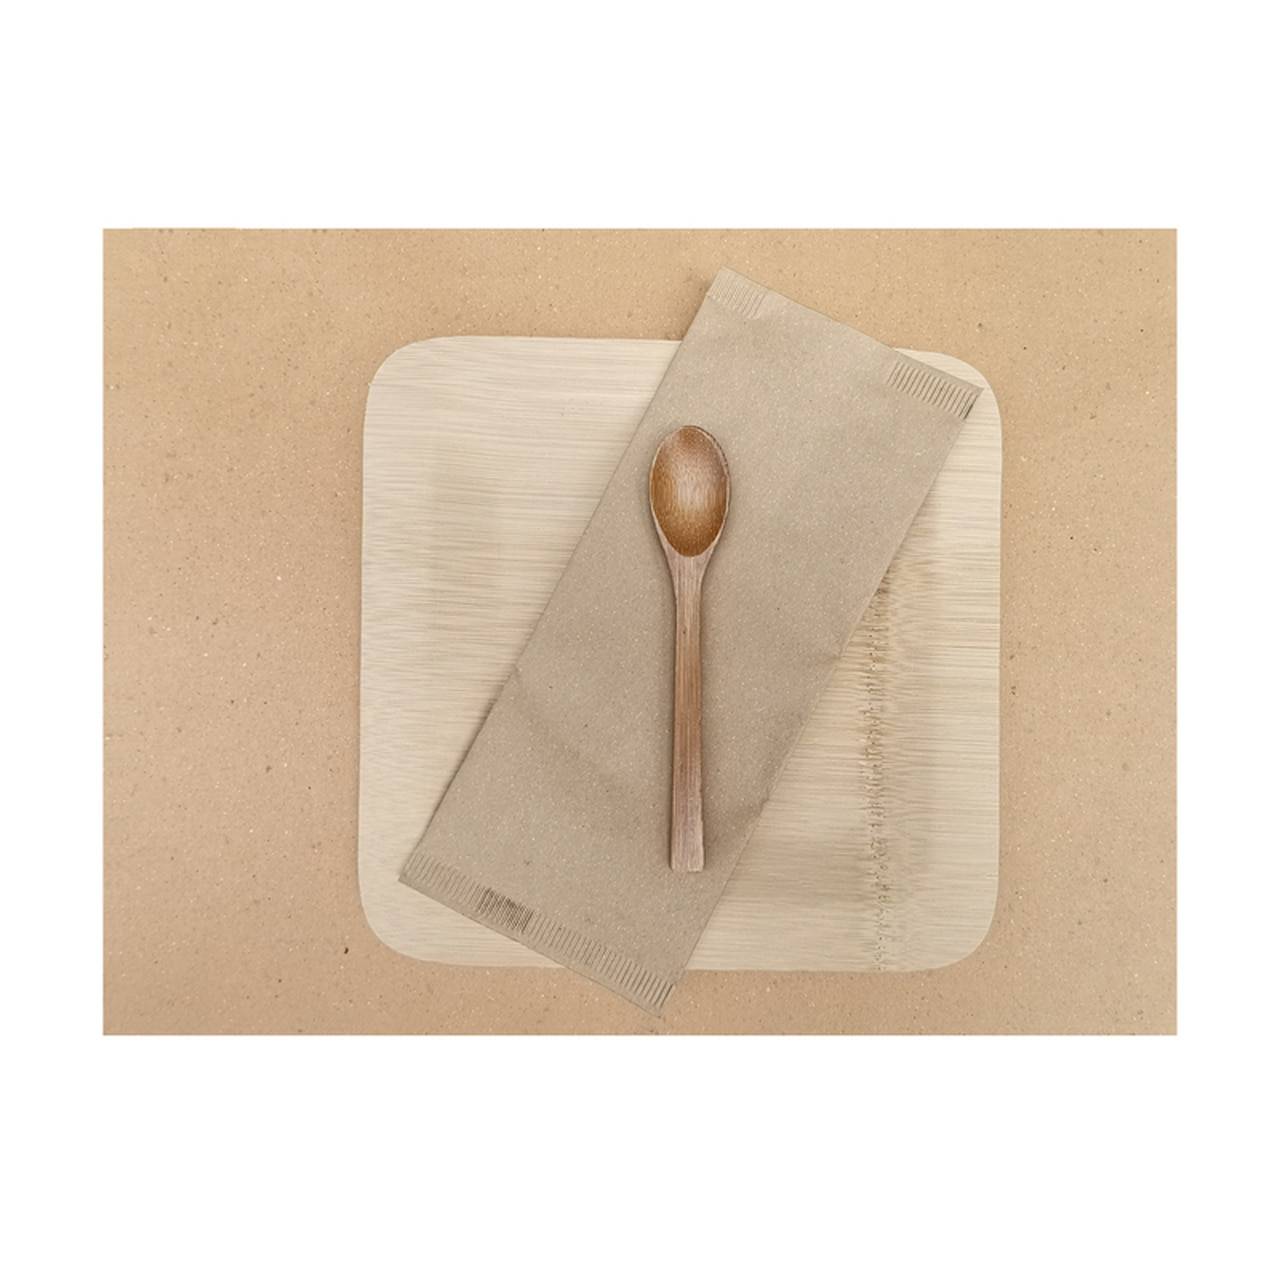 A brown paper placemat with a plate and spoon on top